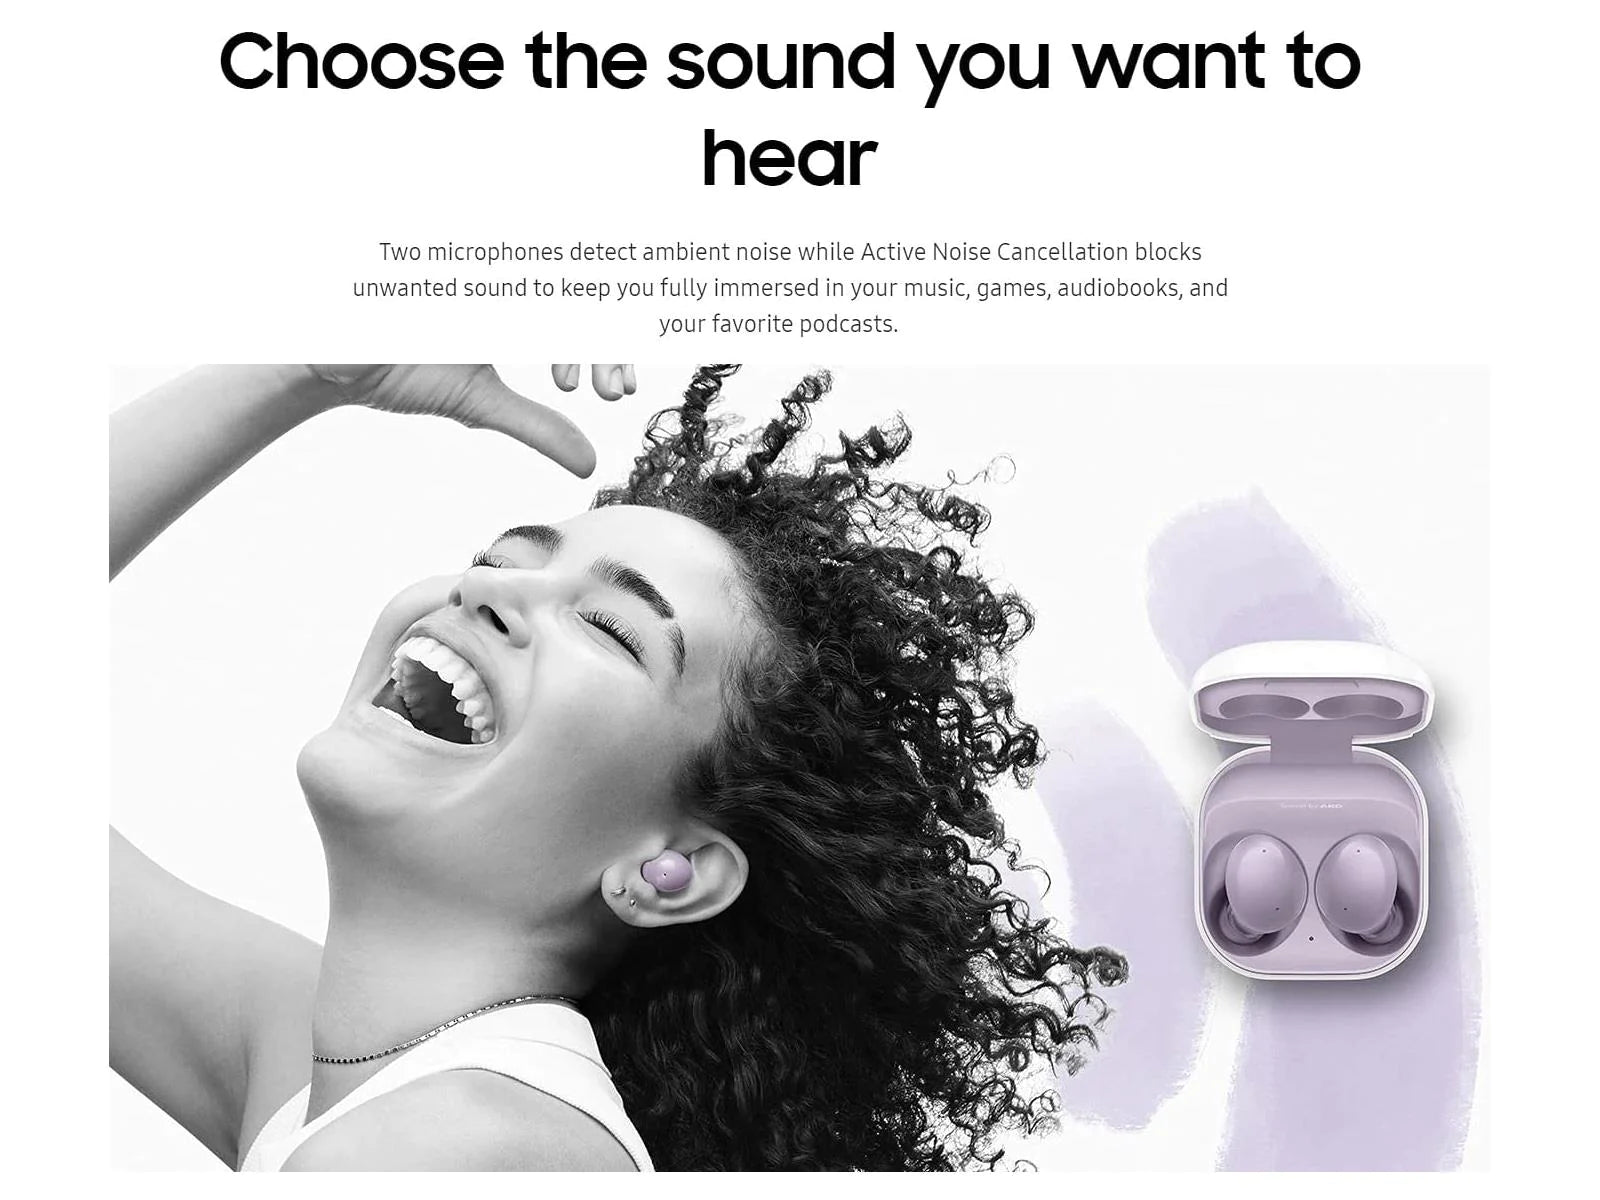 Samsung Galaxy Buds 2 Active Noise Cancellation